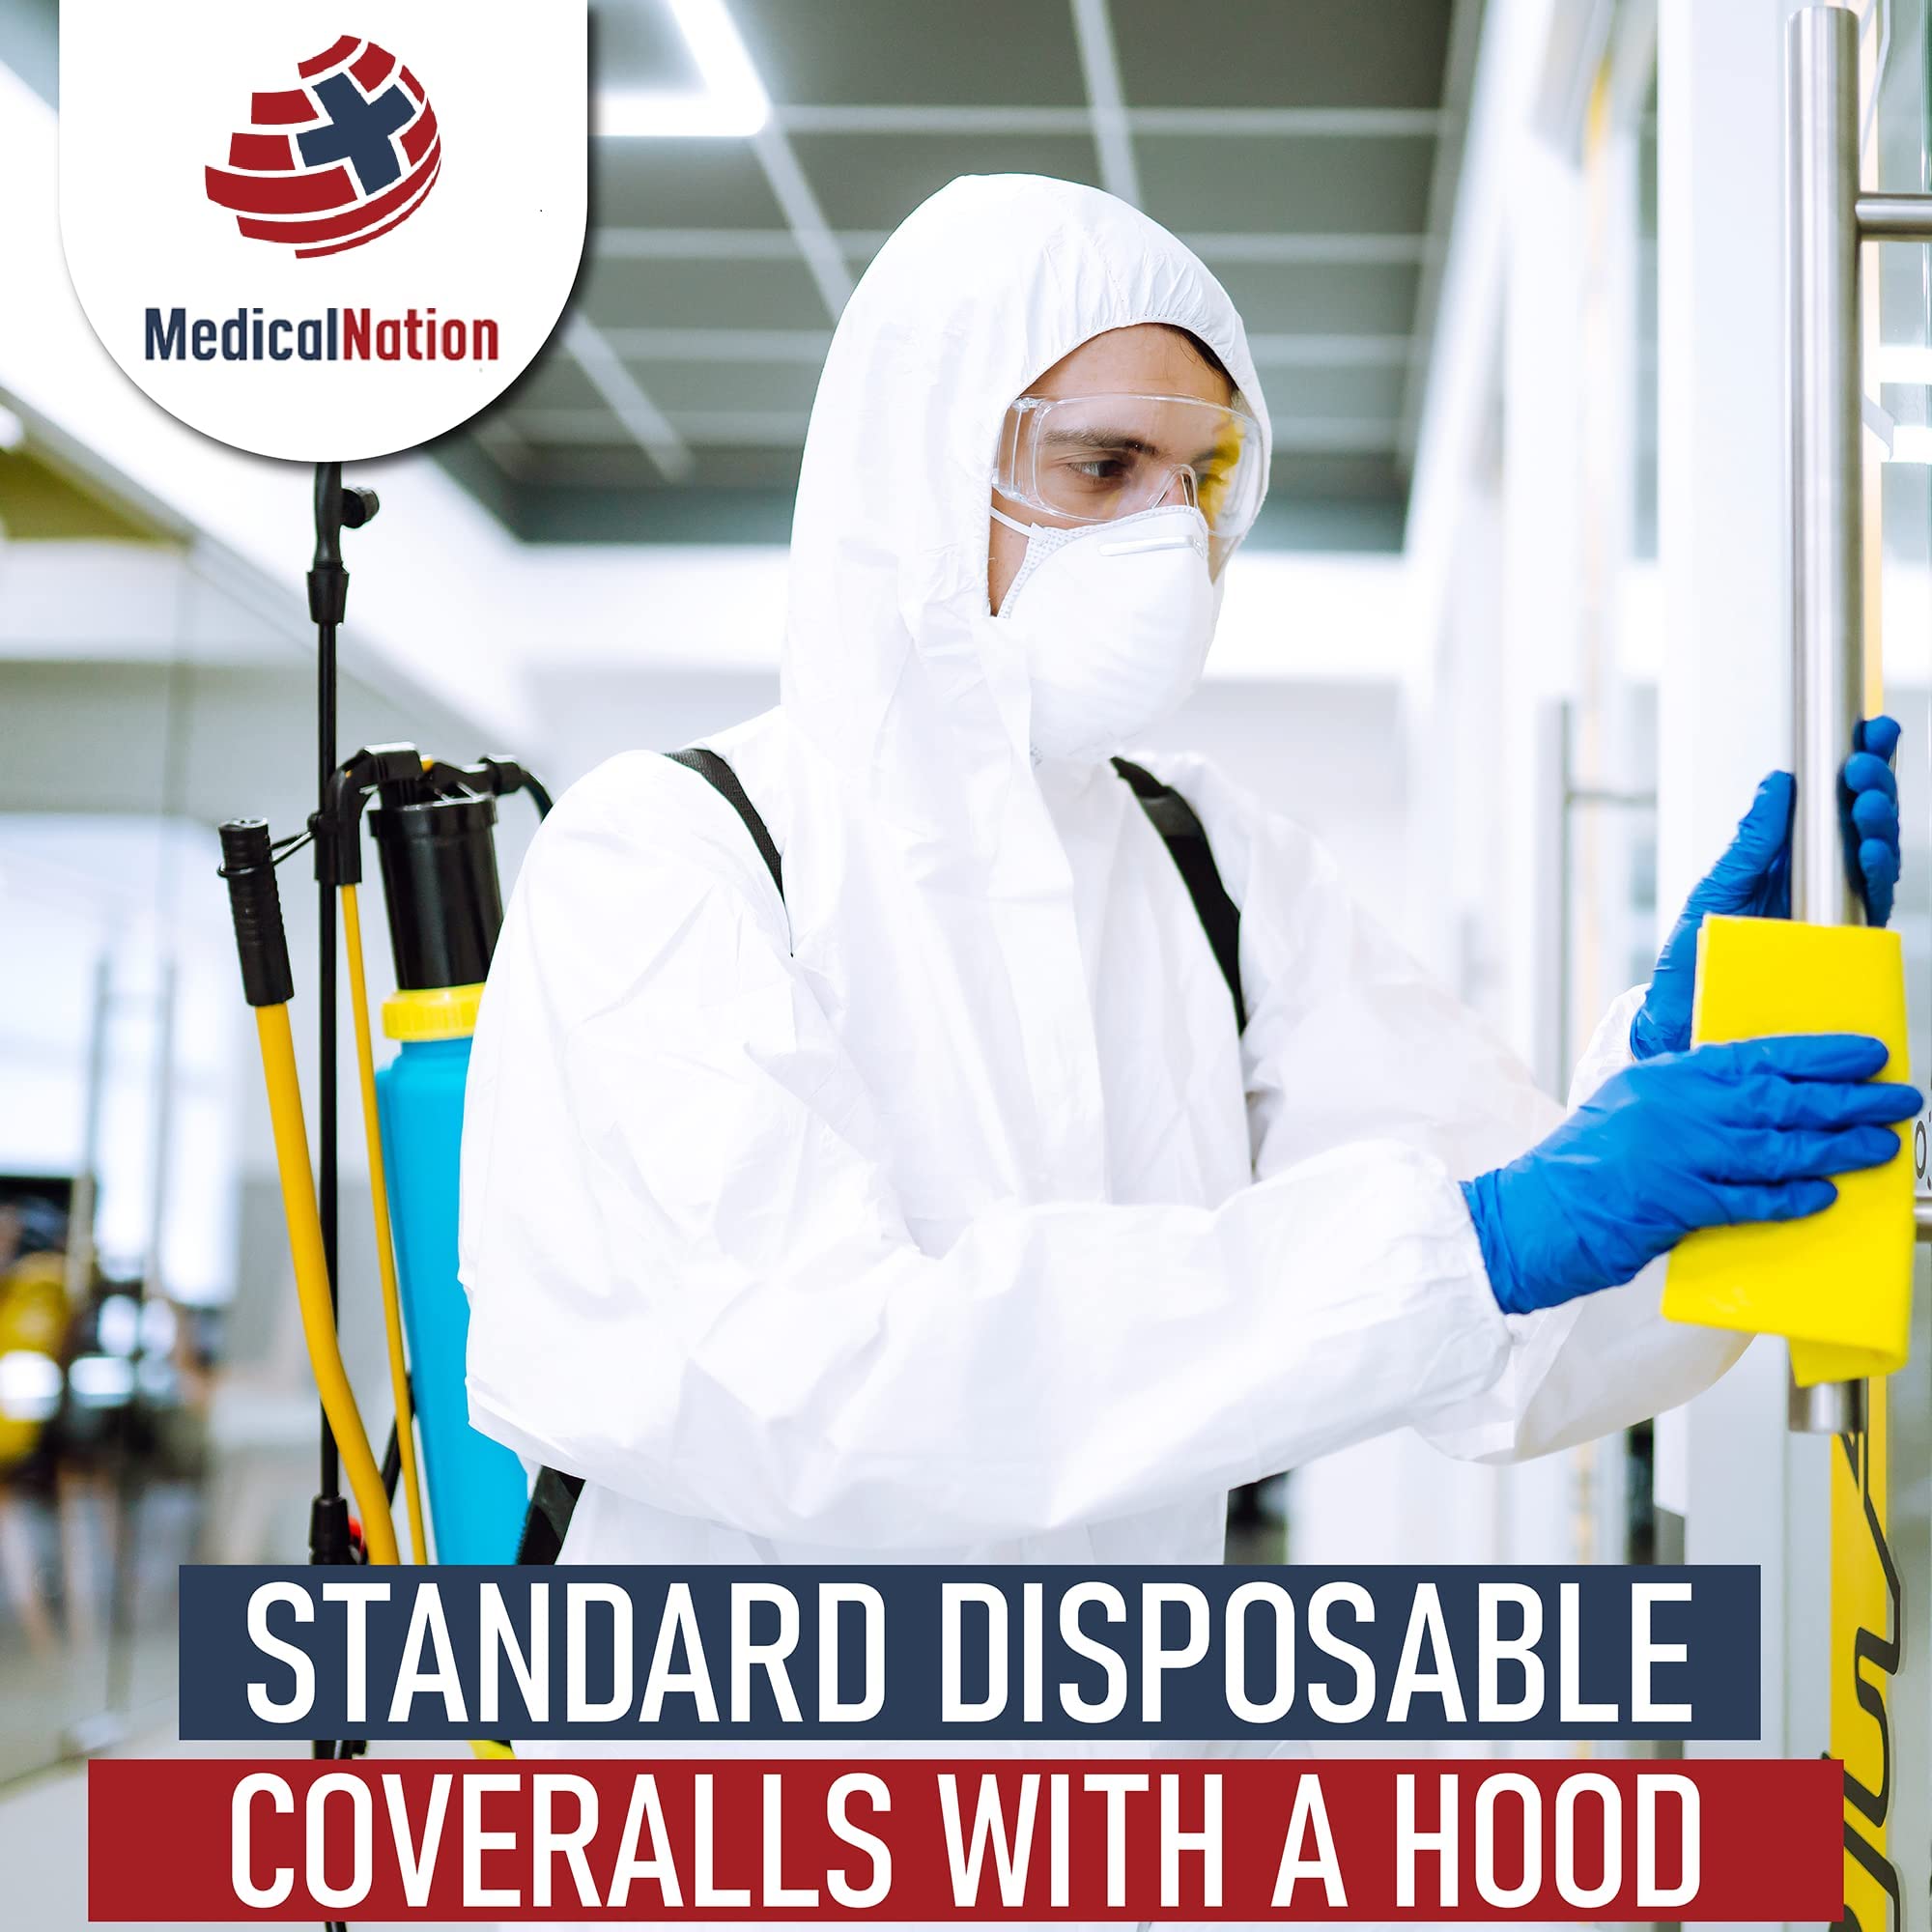 Medical Nation Hazmat Suits | 10 Pack, Medium | Disposable Protective Coveralls, Heavy Duty Full Body Painters Suit for Men & Women with Hood, Sleeves, Zipper - Breathable & Water Resistant - Medium